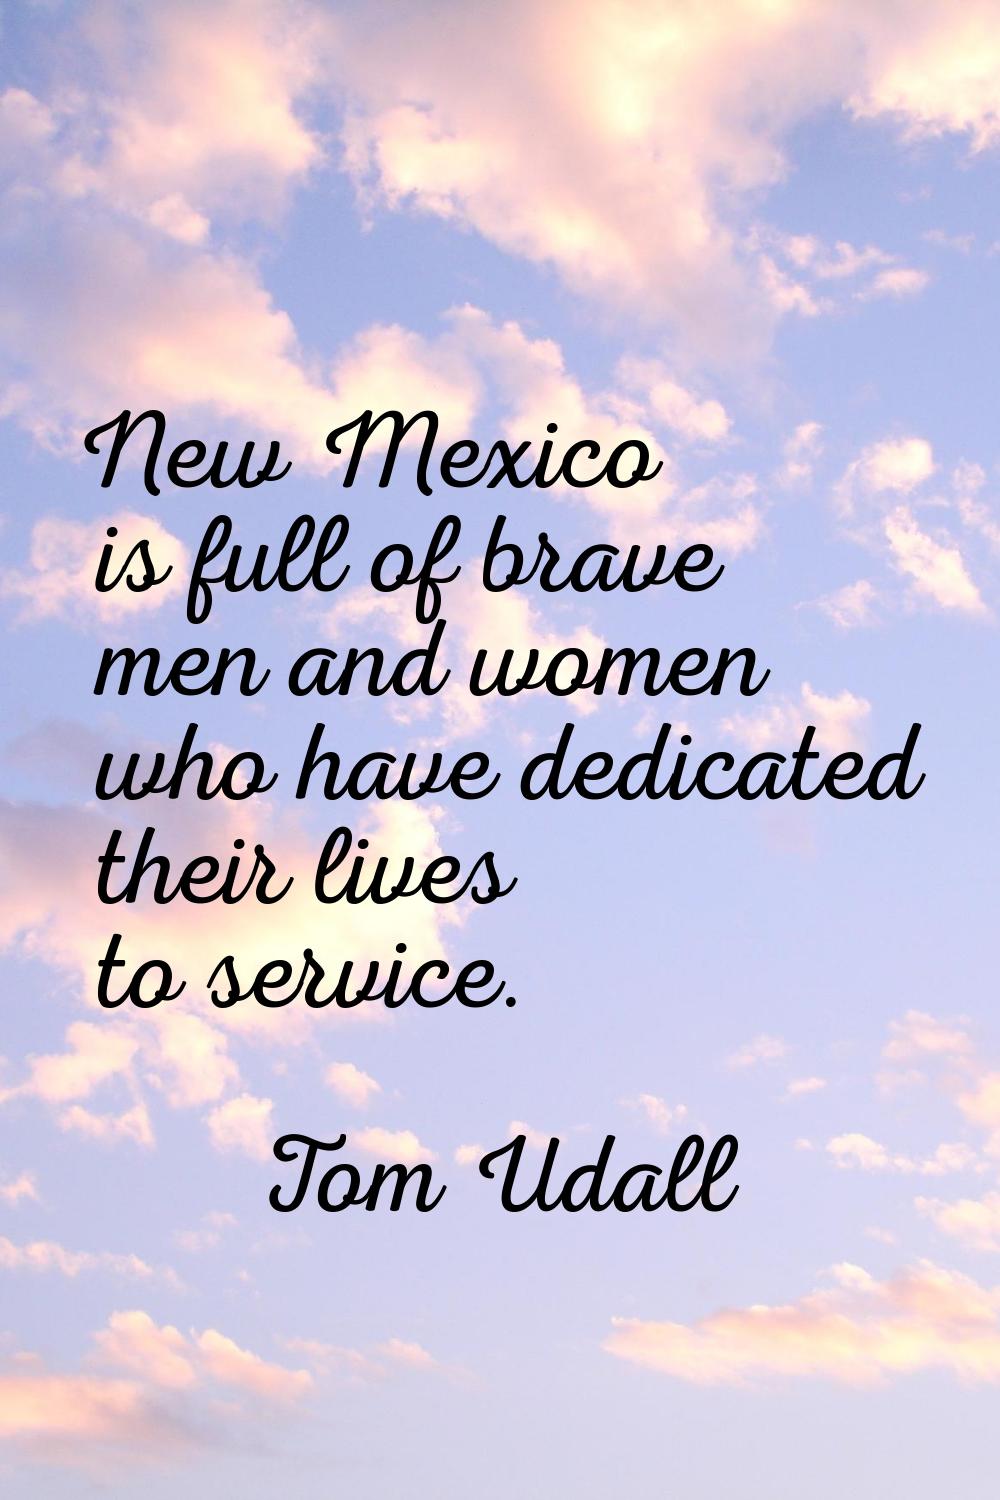 New Mexico is full of brave men and women who have dedicated their lives to service.